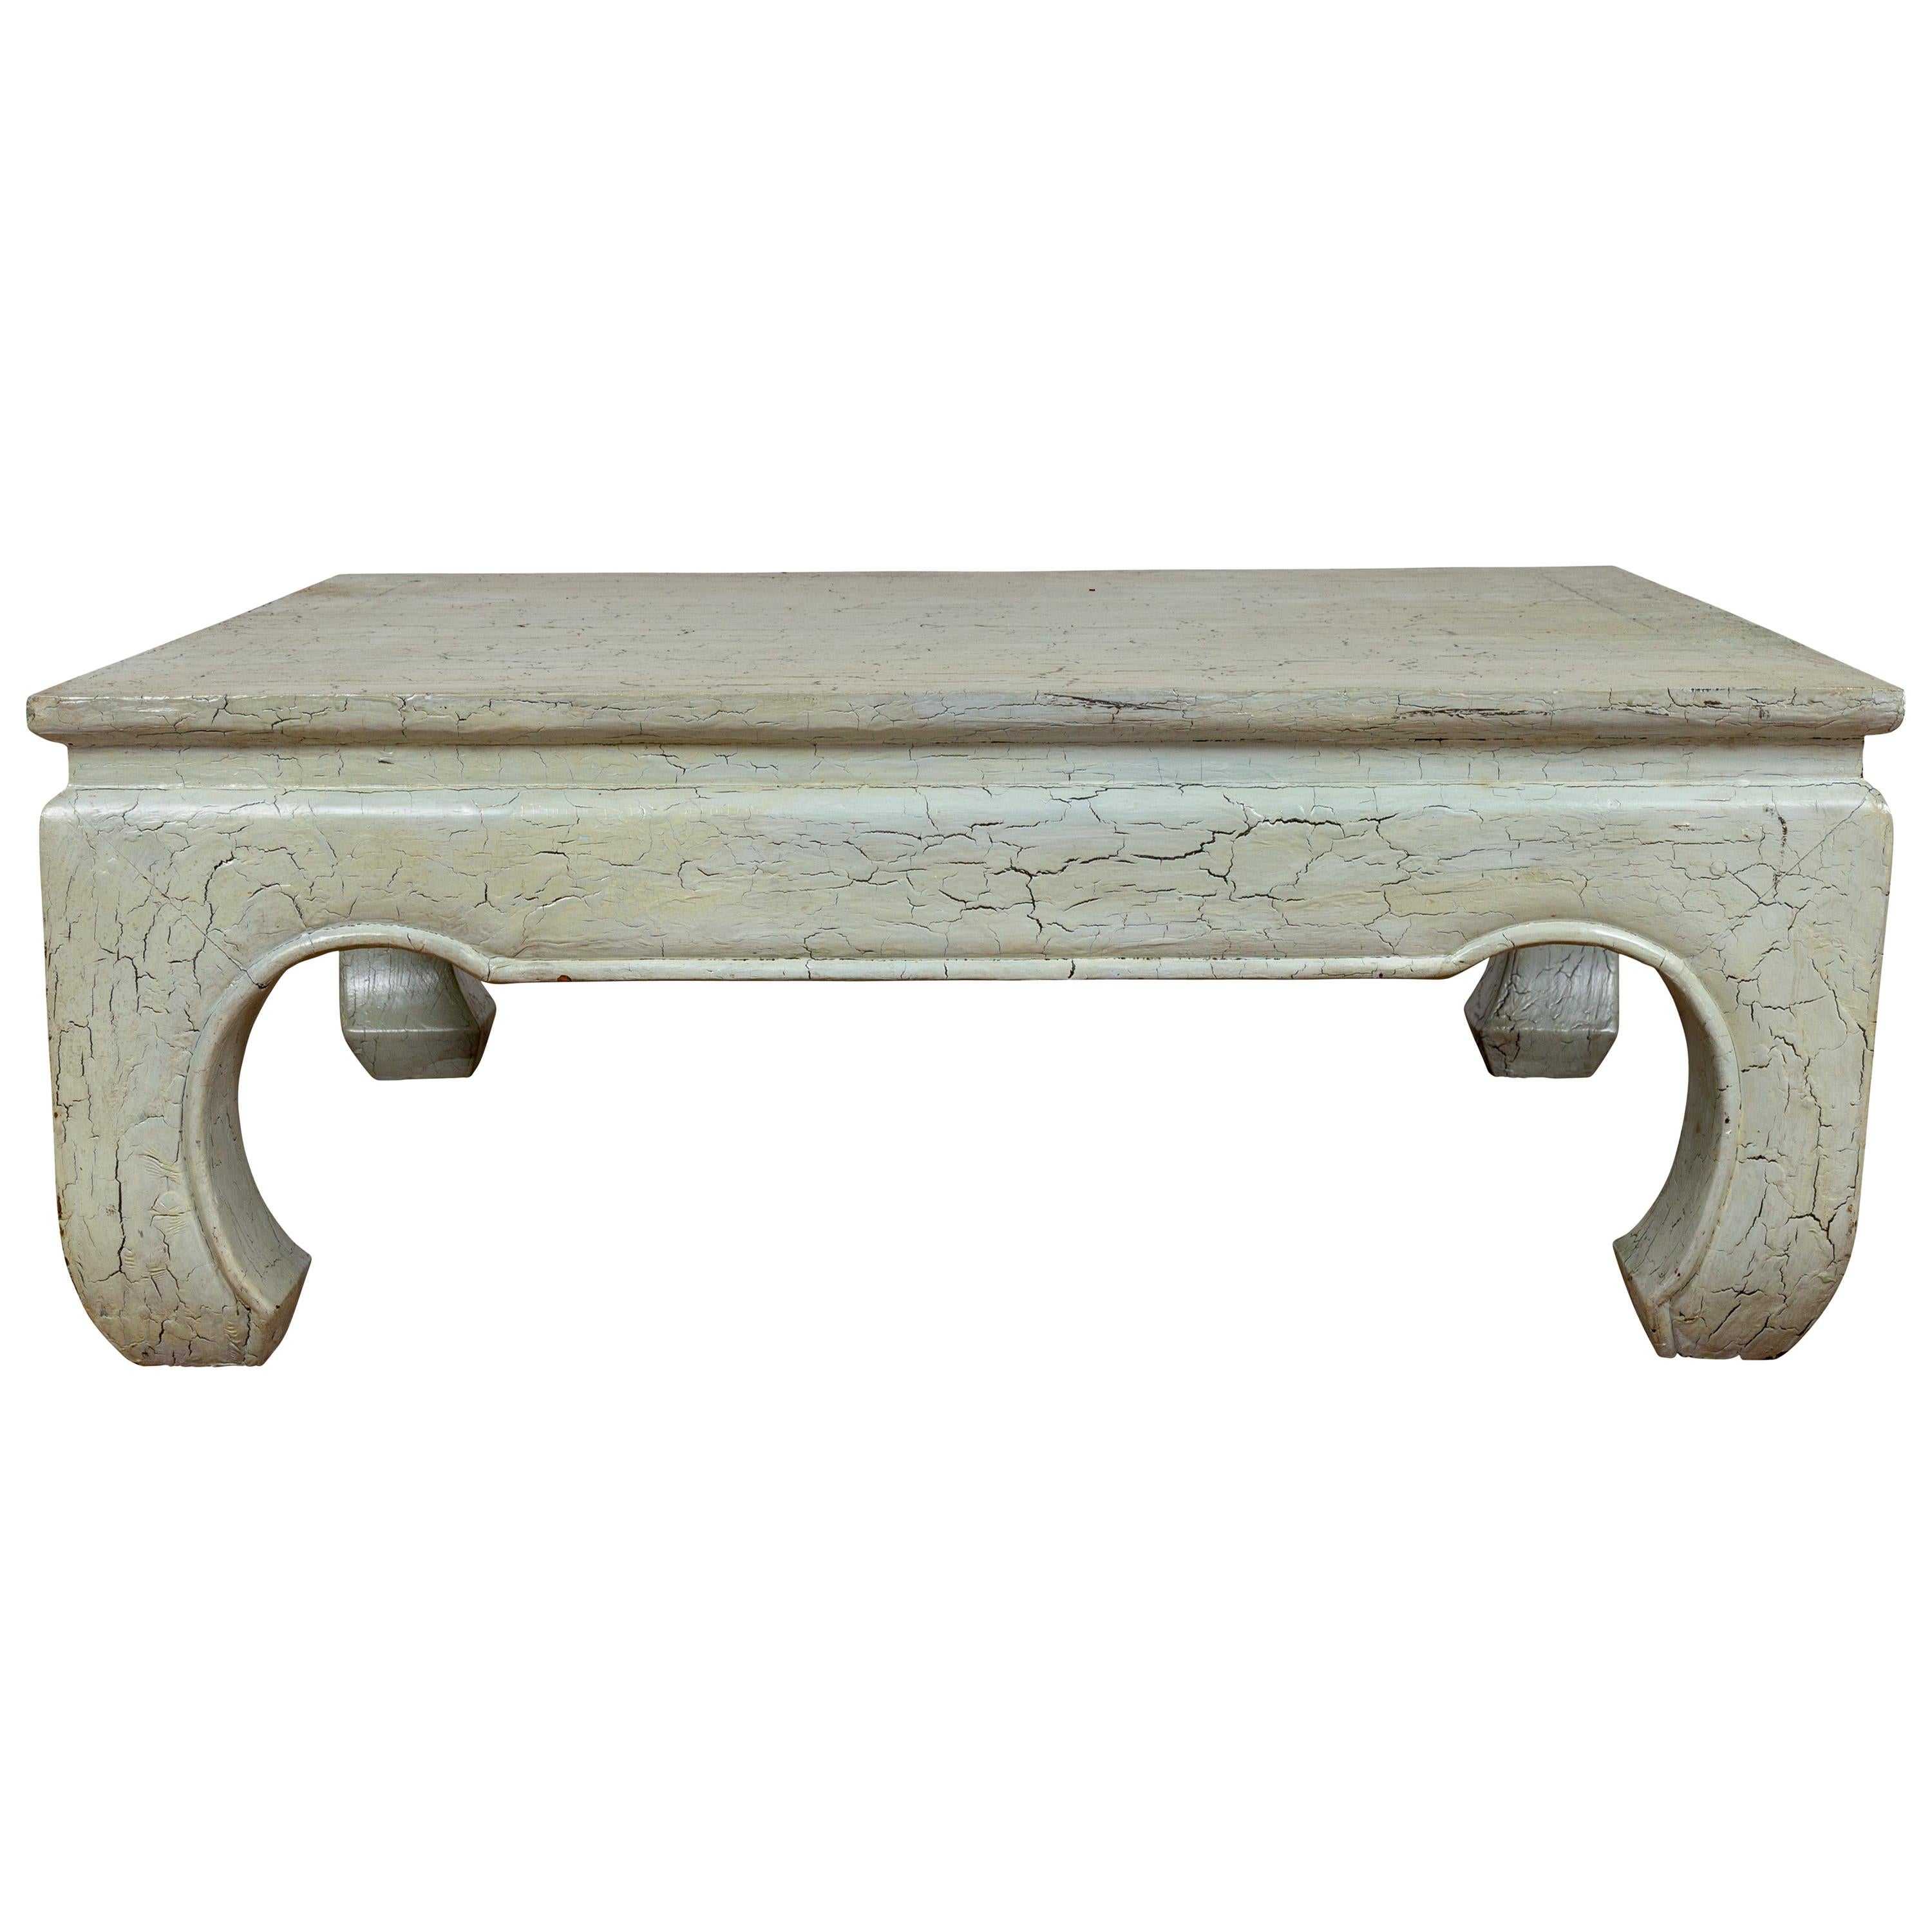 Vintage Mint Green Coffee Table from Thailand with Crackled Finish and Chow Legs